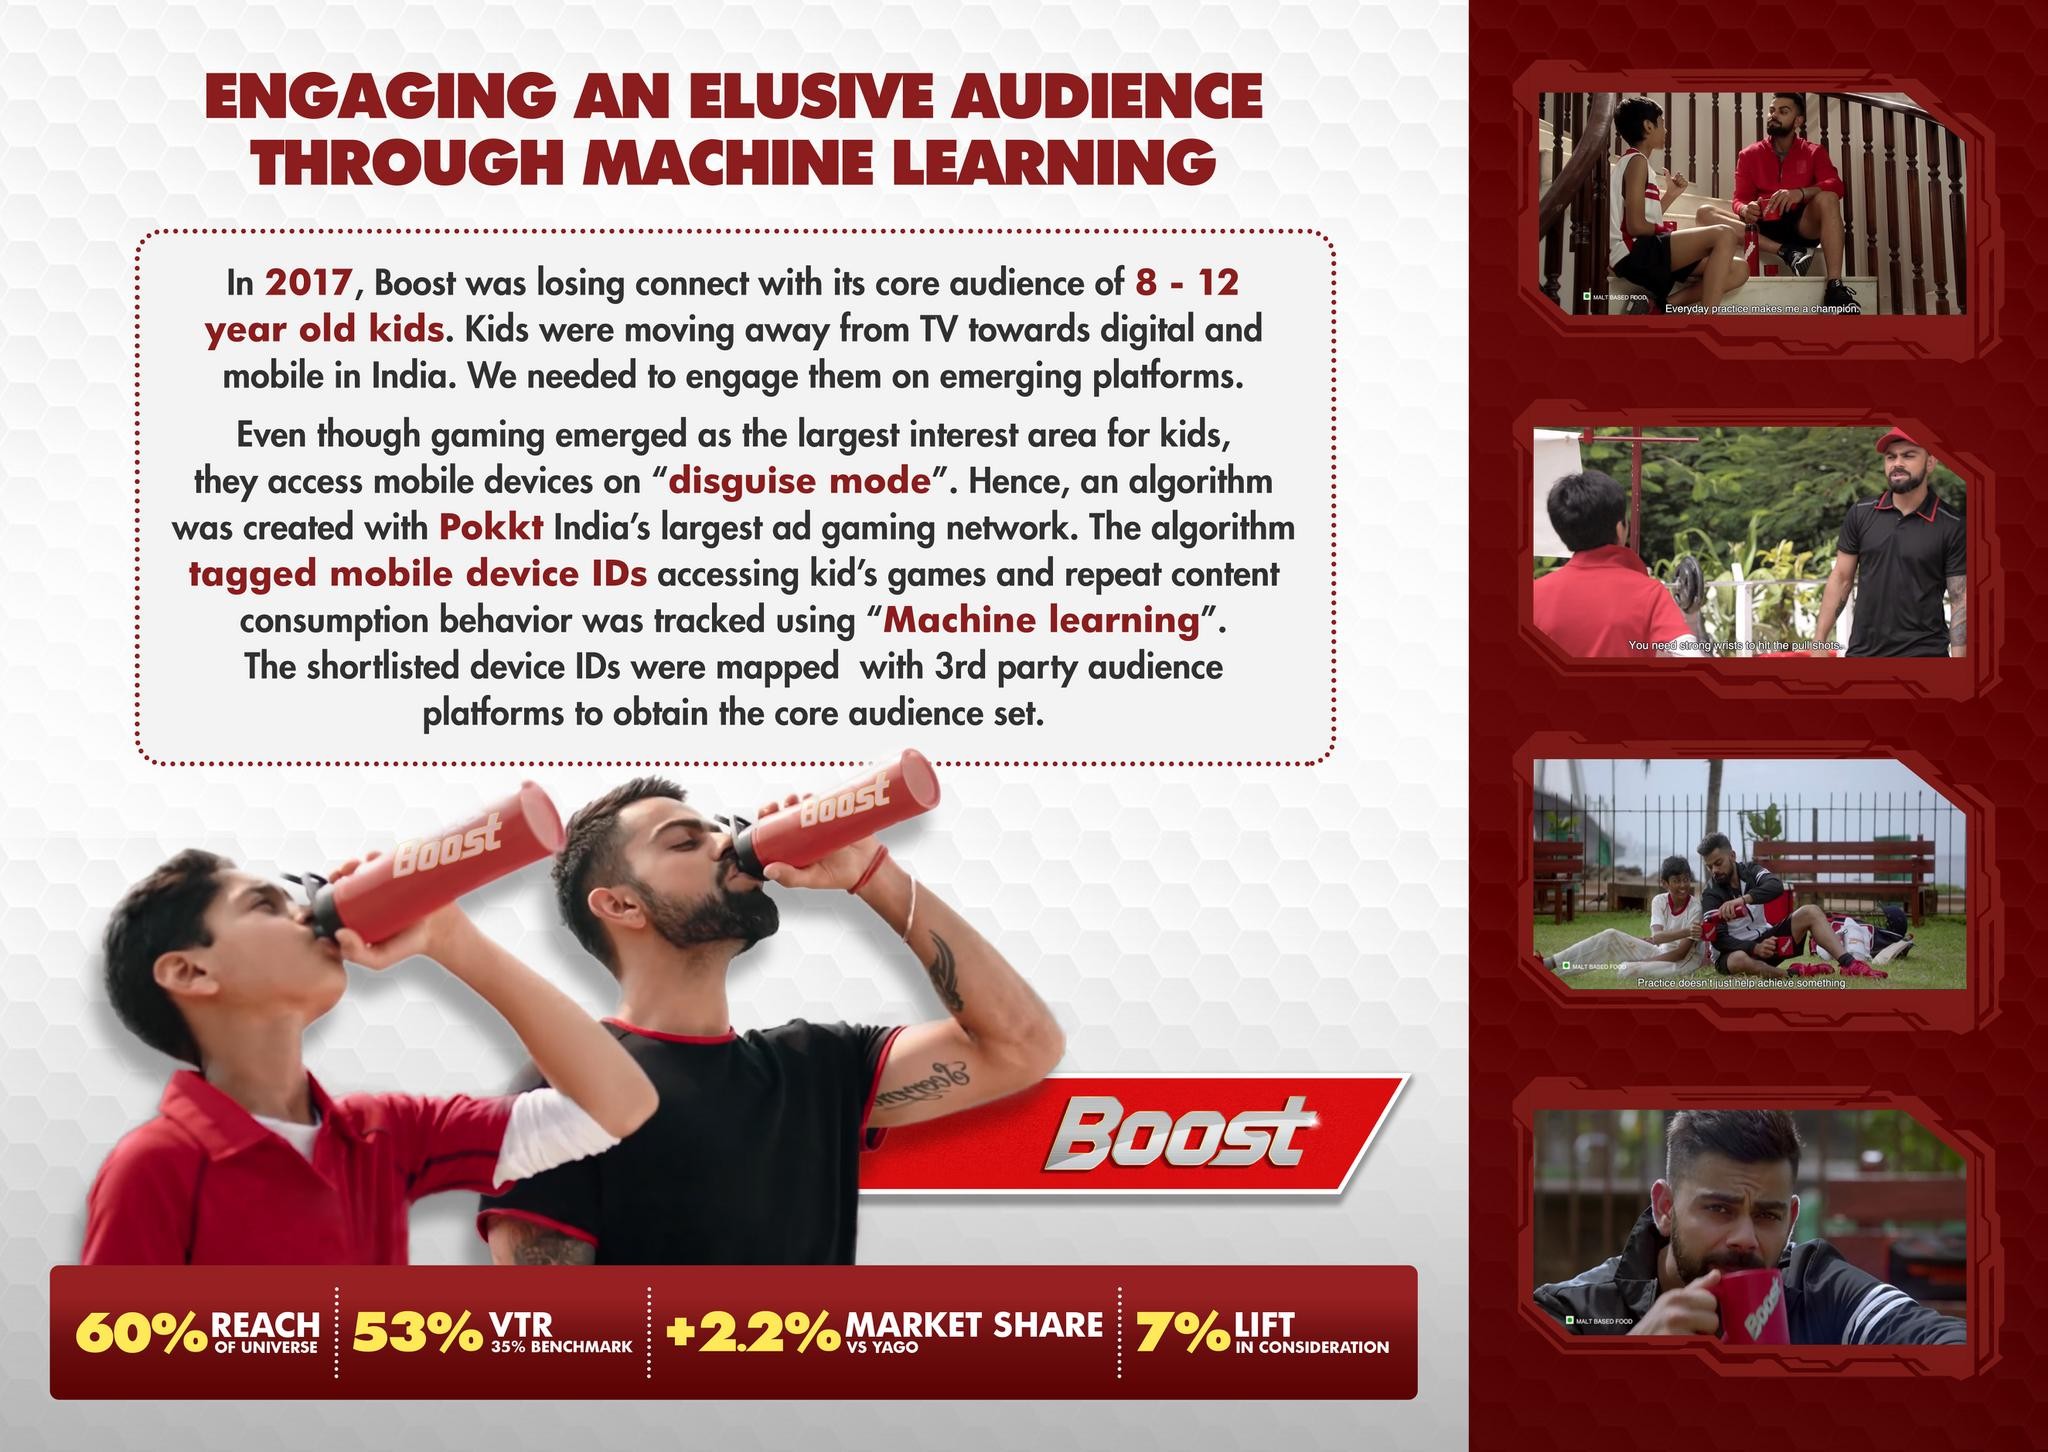 How Boost used machine learning to target kids online